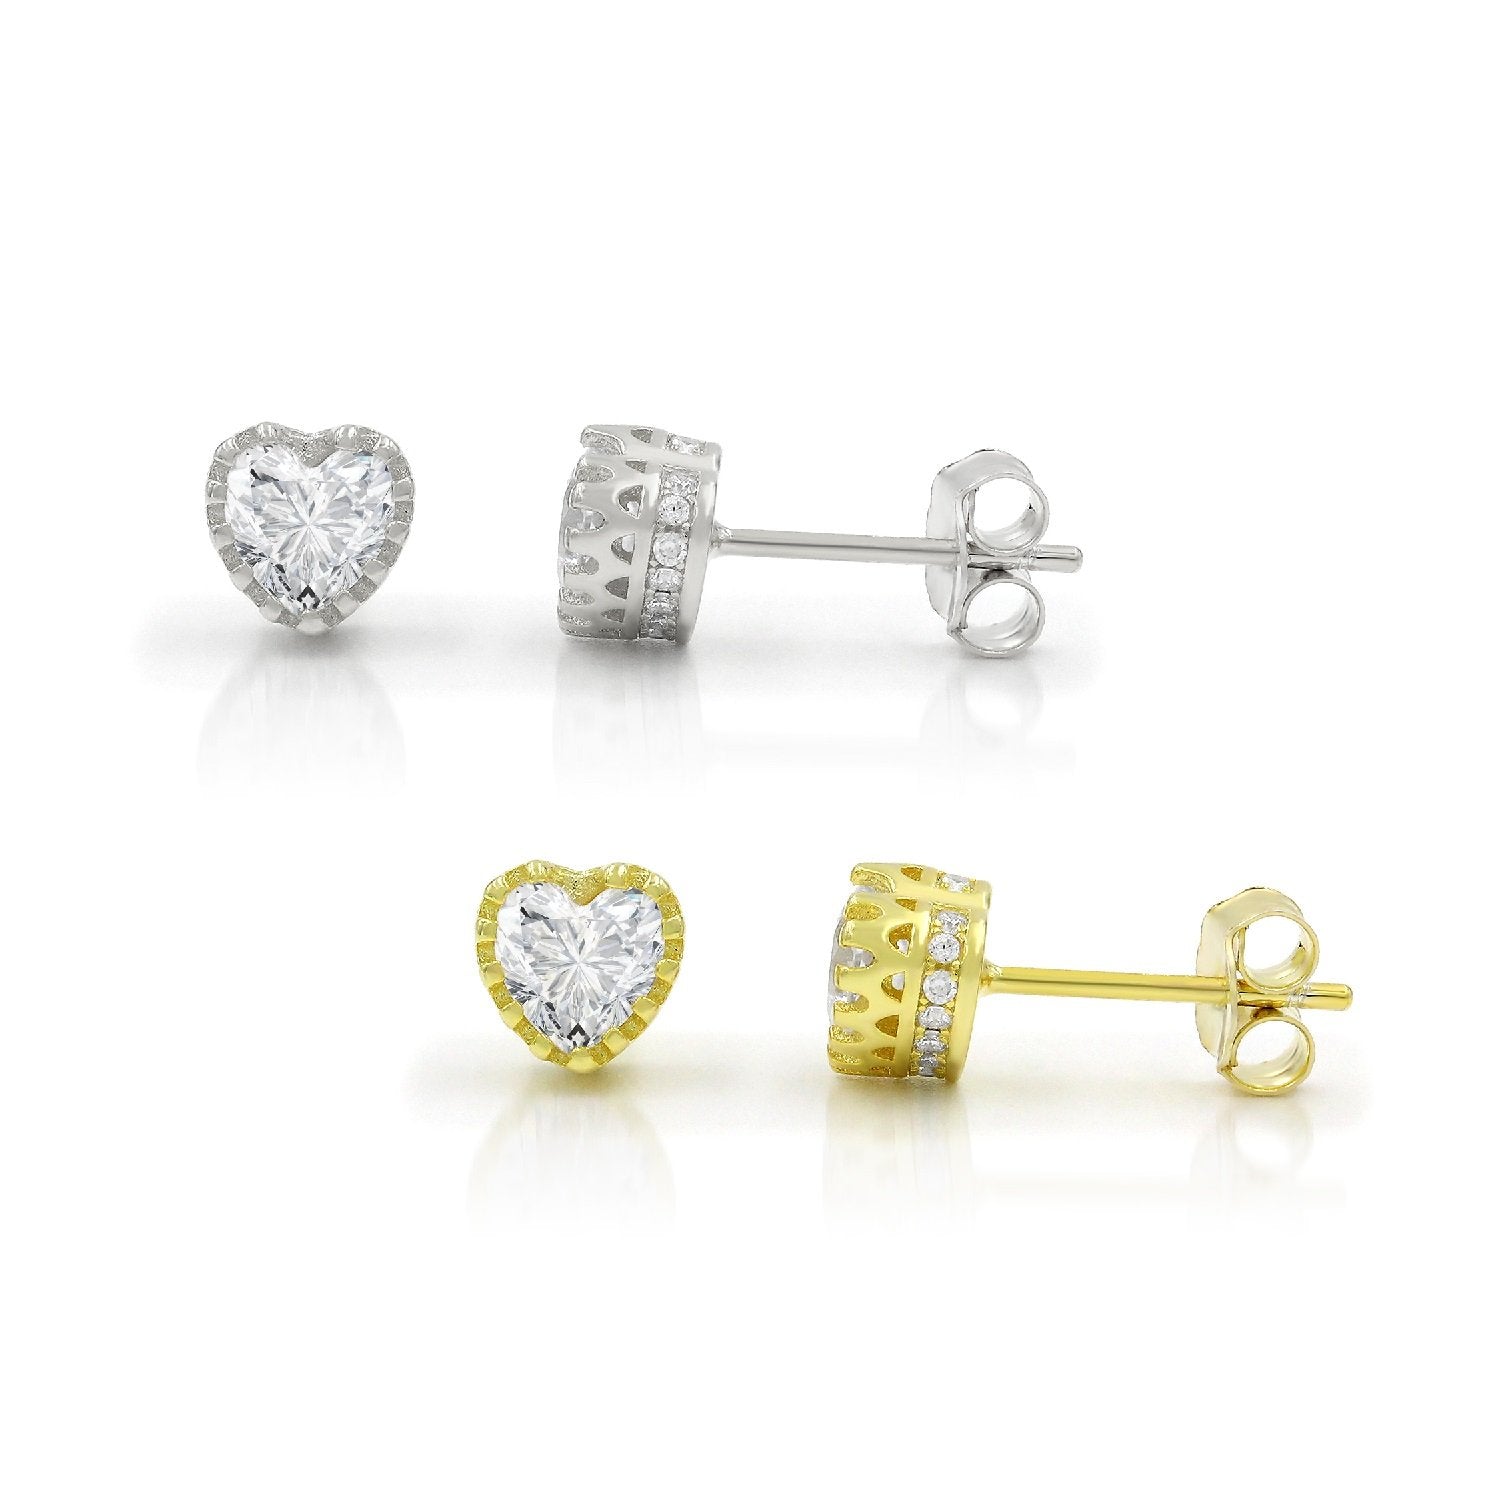 925 Sterling Silver Gold Plated Heart Crowned Stud Earring